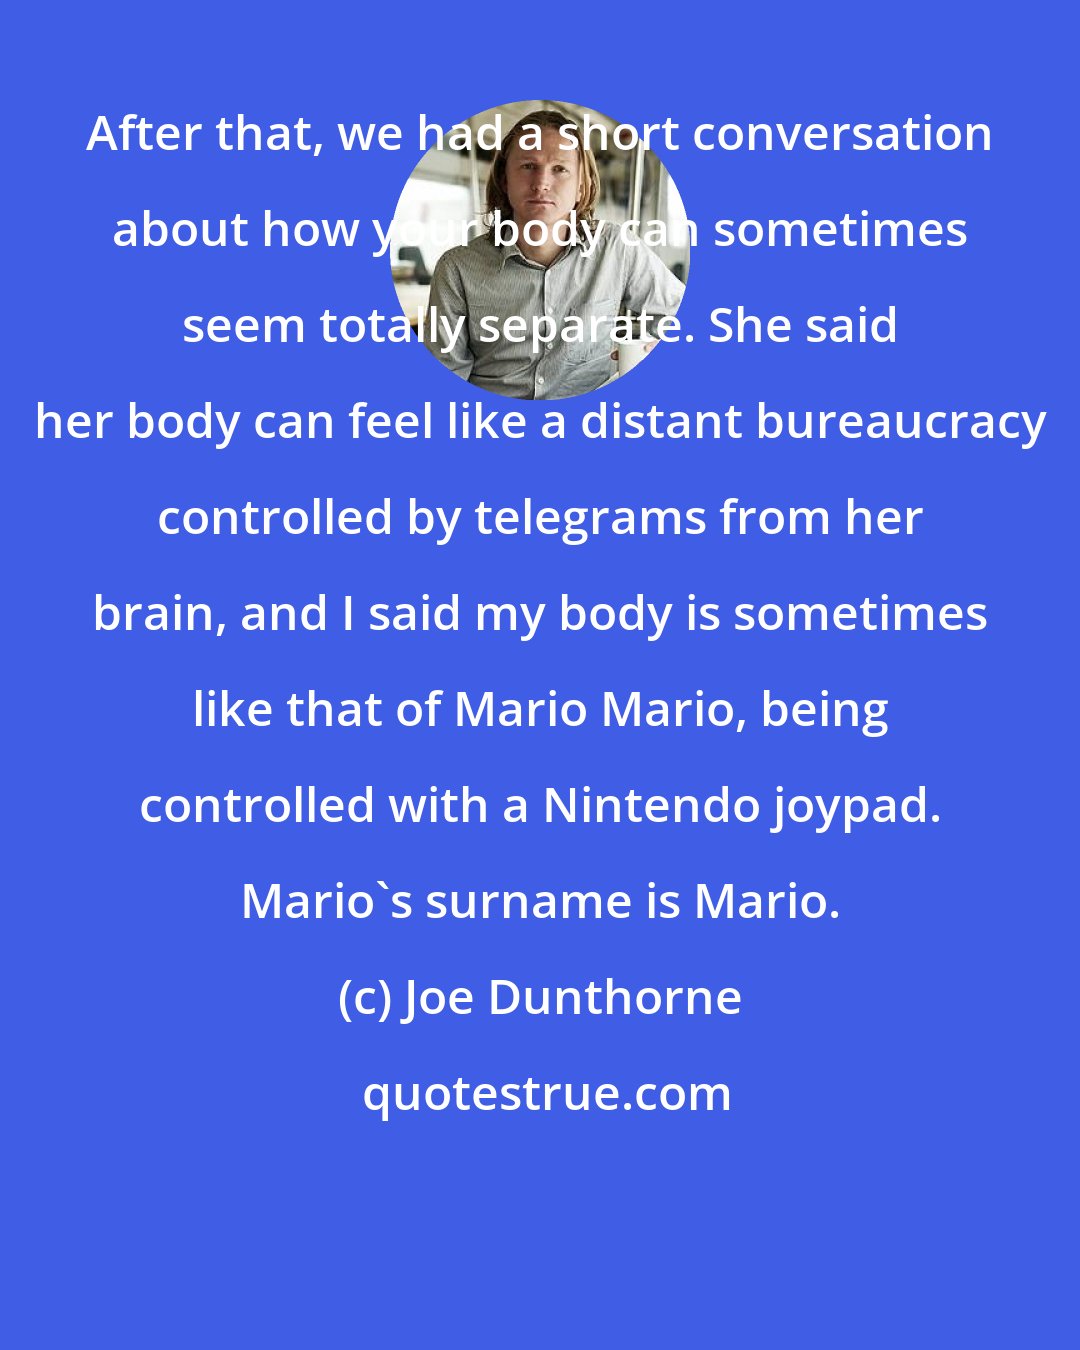 Joe Dunthorne: After that, we had a short conversation about how your body can sometimes seem totally separate. She said her body can feel like a distant bureaucracy controlled by telegrams from her brain, and I said my body is sometimes like that of Mario Mario, being controlled with a Nintendo joypad. Mario's surname is Mario.